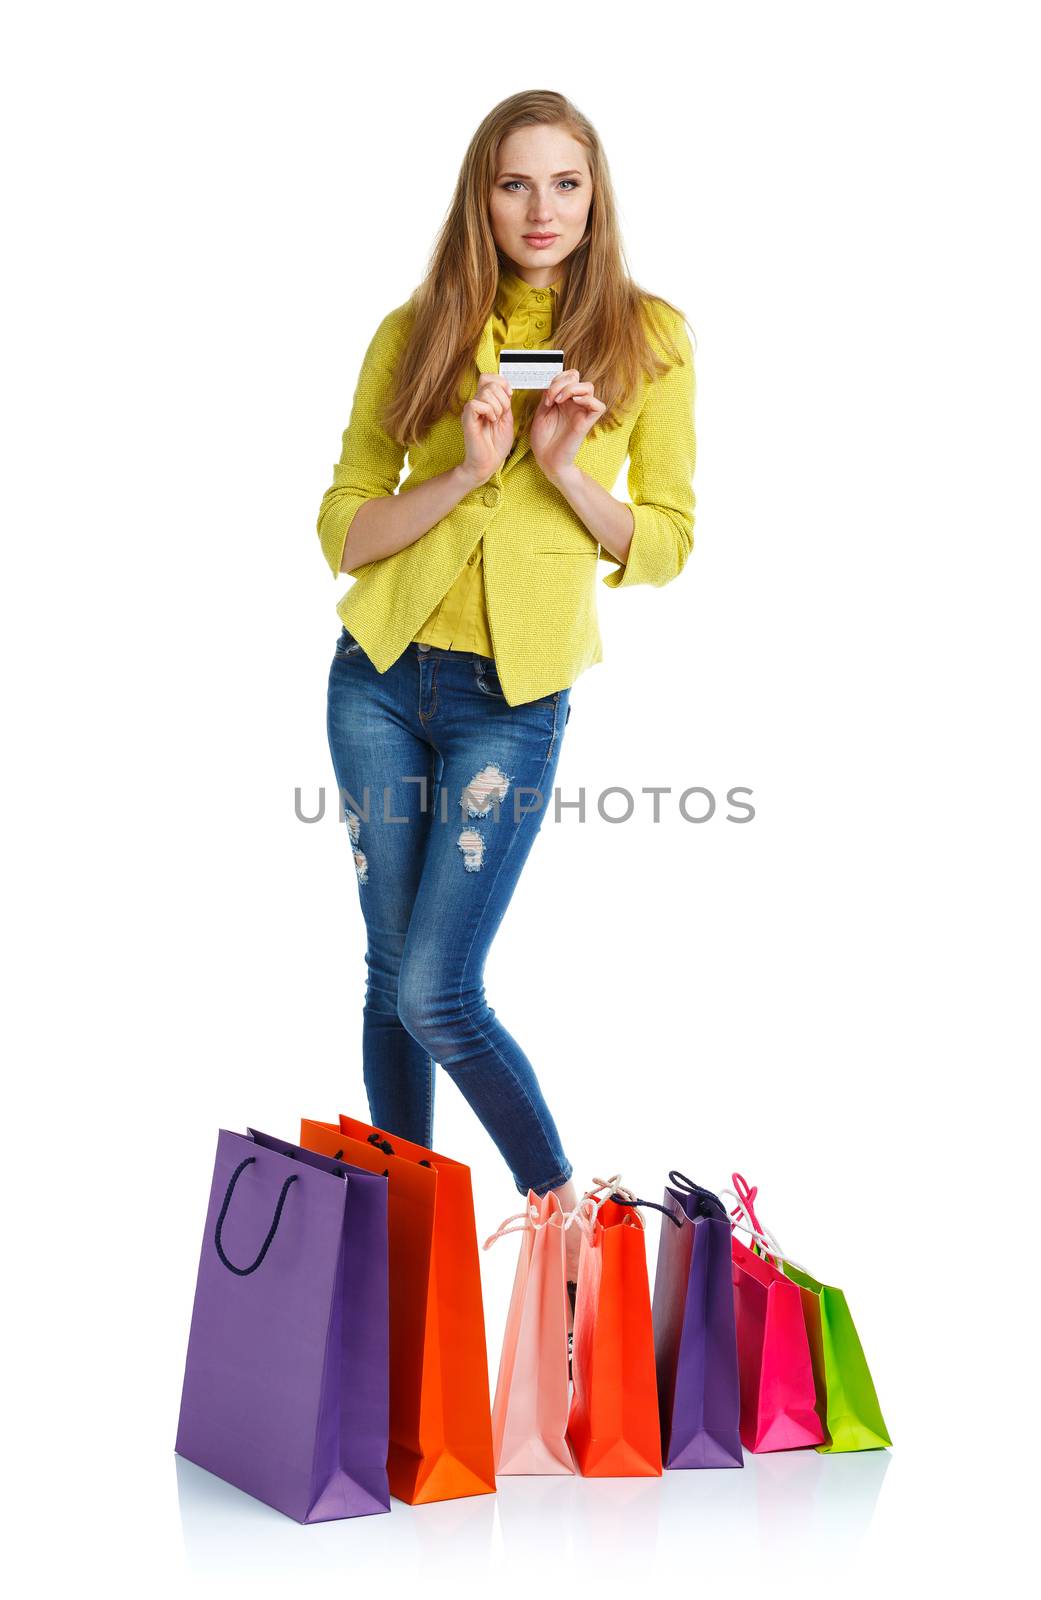 Shopaholic woman with shopping bags and credit card over white b by vlad_star